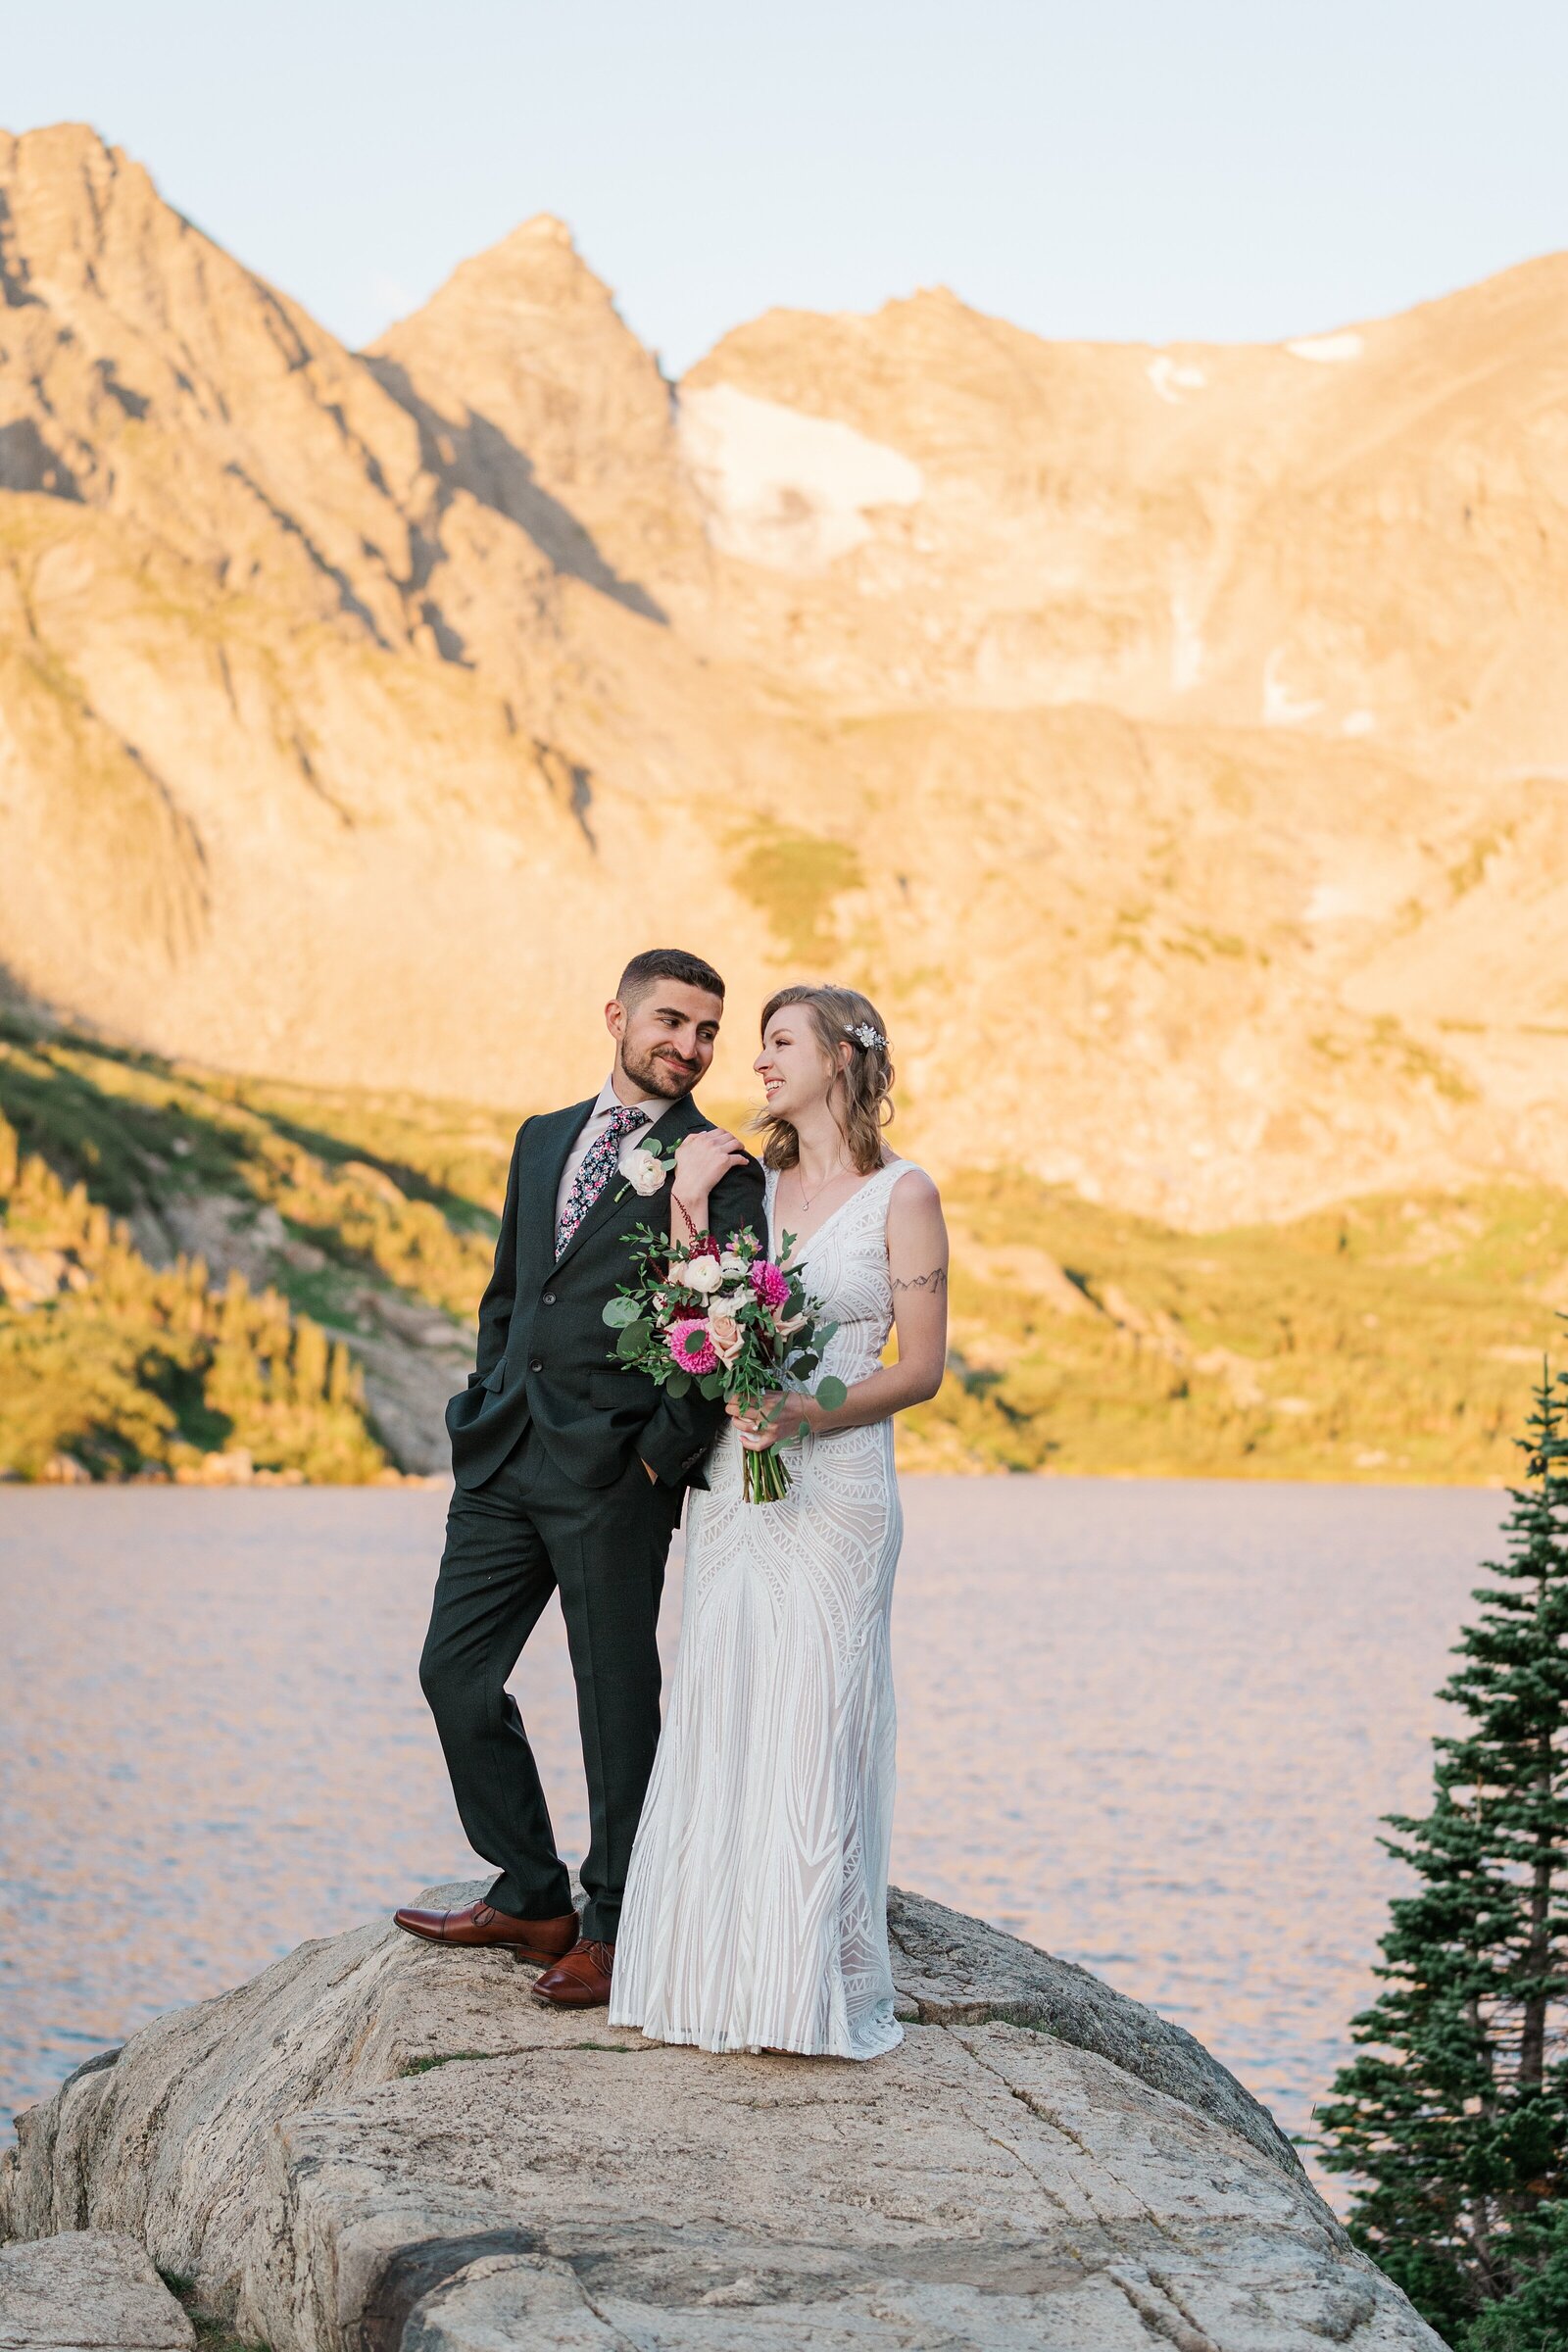 Samantha Immer's signature photography experience is a personalized and customized approach to capturing your love story. Trust her to create images that are as unique and special as your relationship.